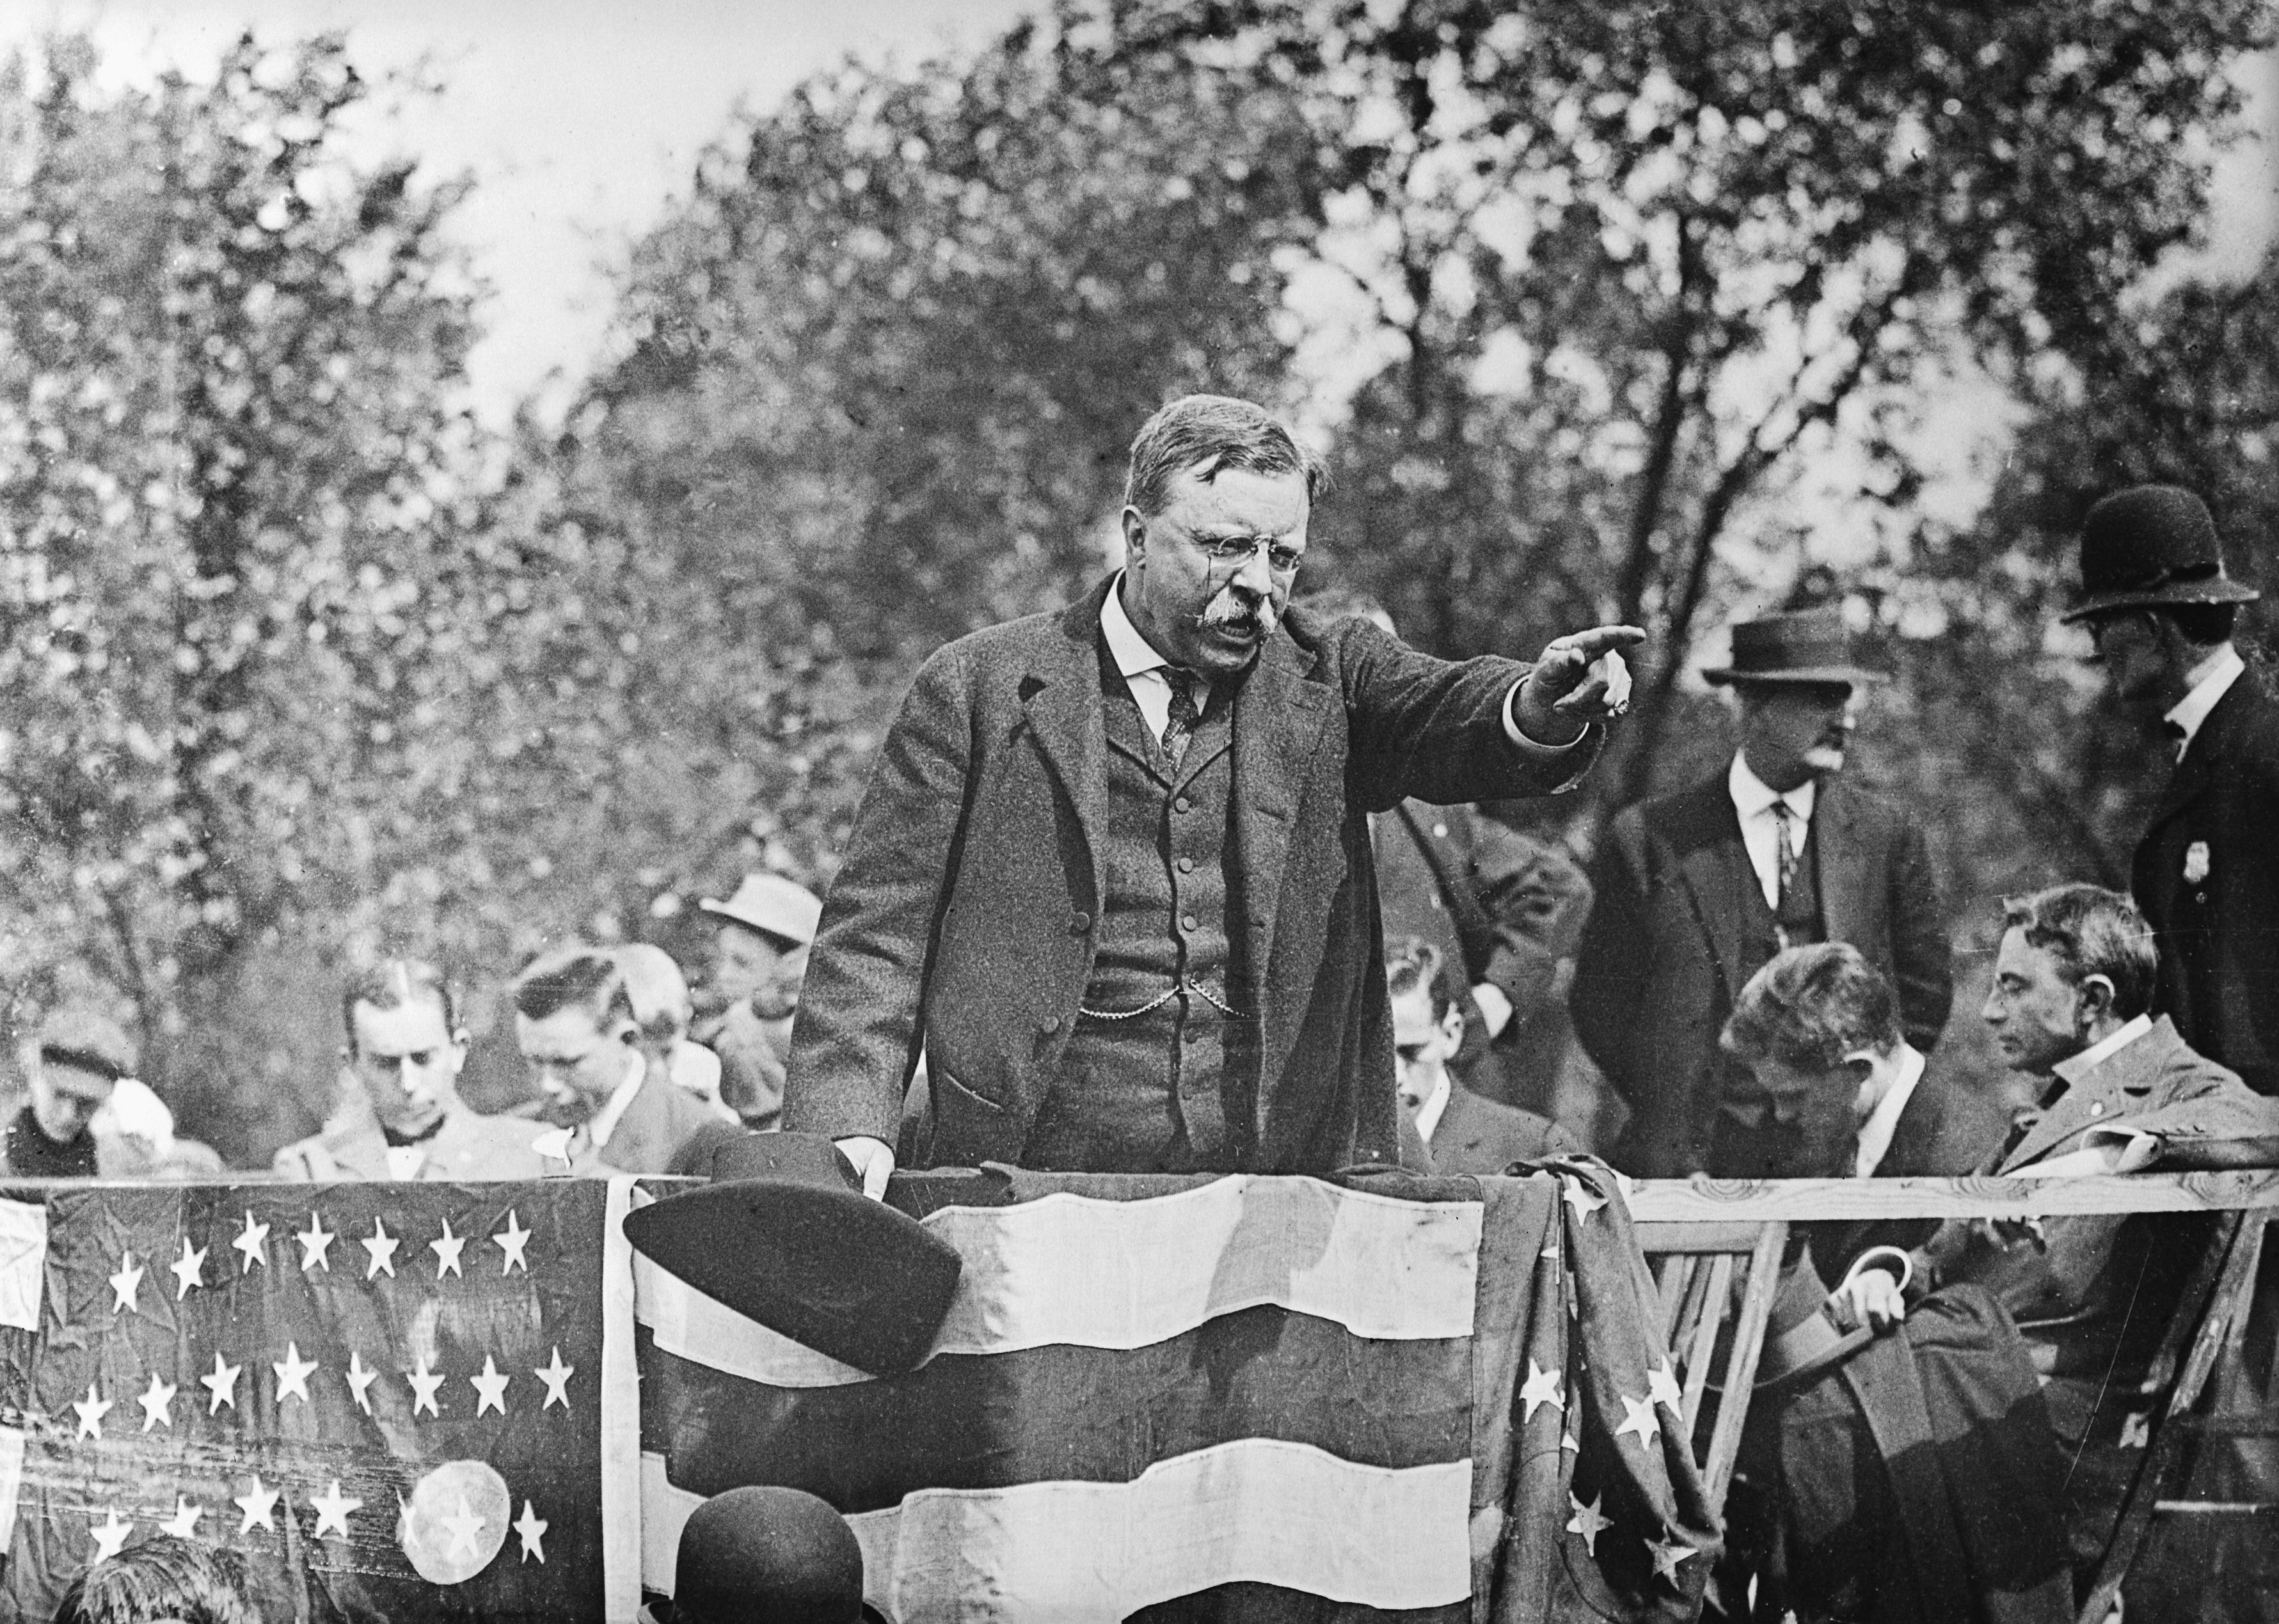 Theodore Roosevelt giving a campaign speech onstage.